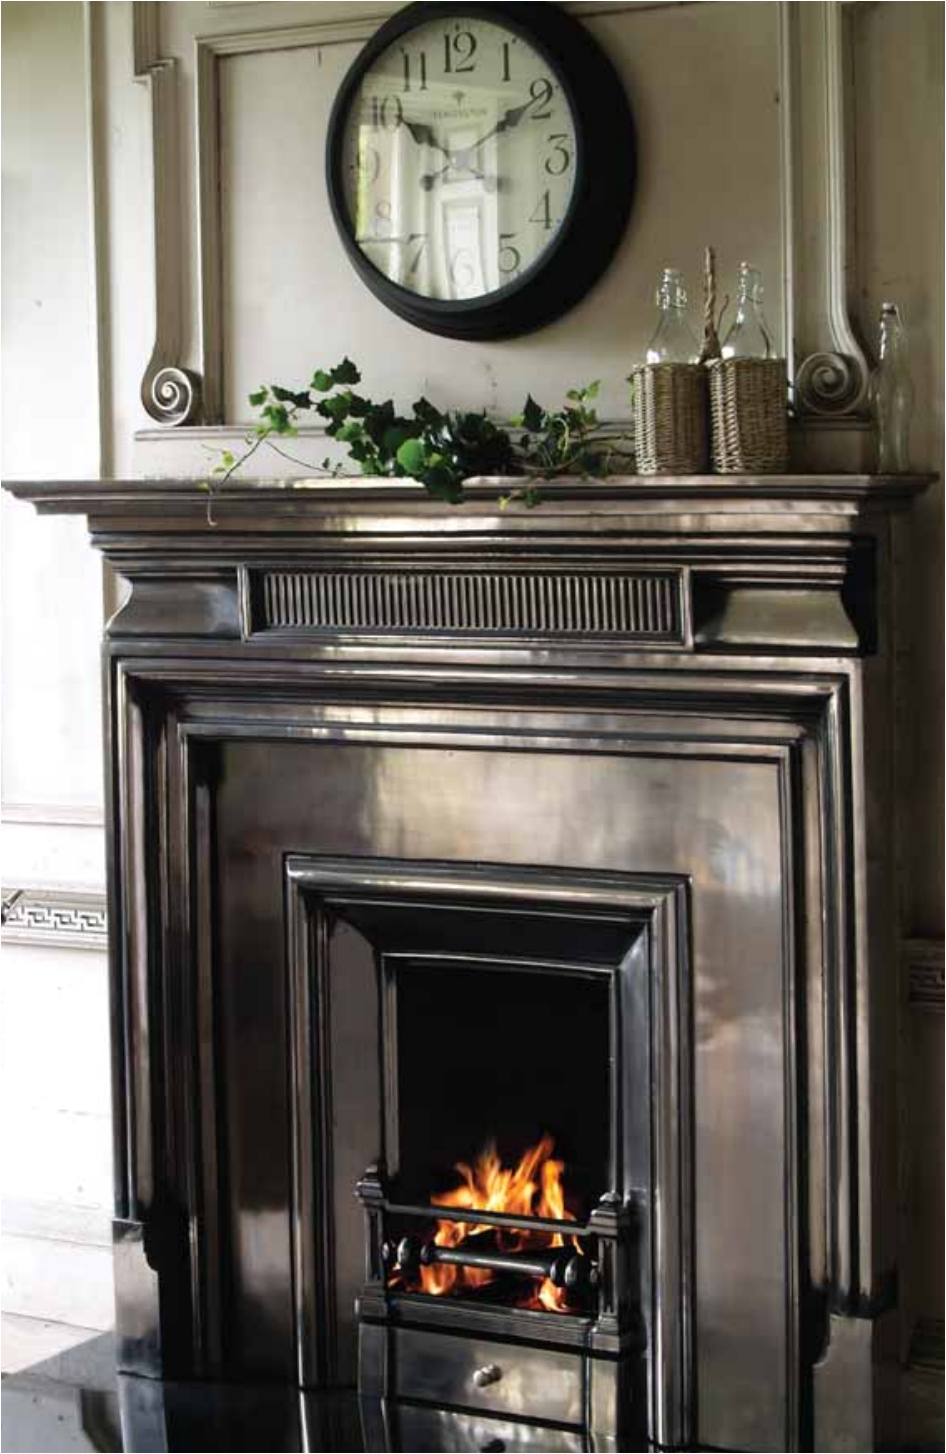 new traditional victorian style carron cast iron fireplaces made to look like old antique fireplaces fire surrounds and fire baskets are for sale at ukaa